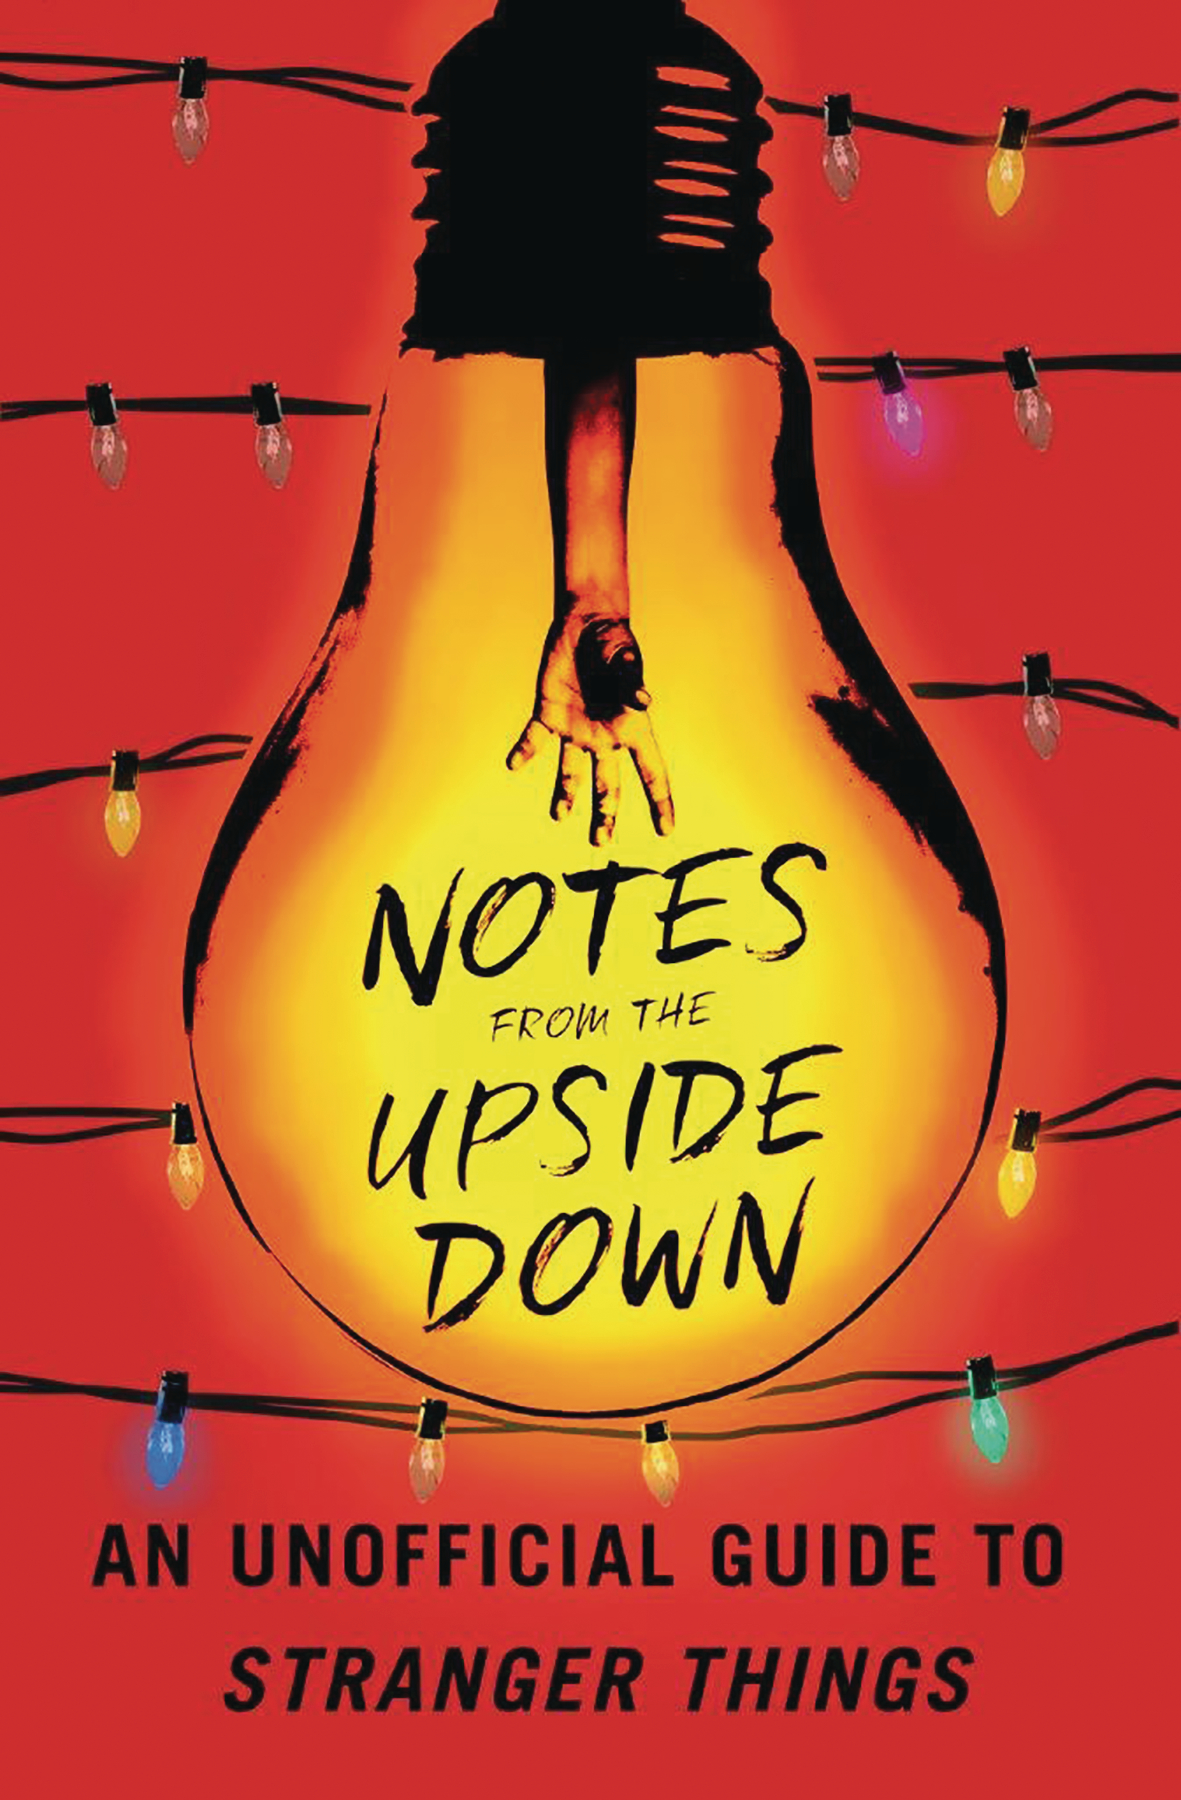 NOTES FROM UPSIDE DOWN UNOFF GT STRANGER THINGS SC